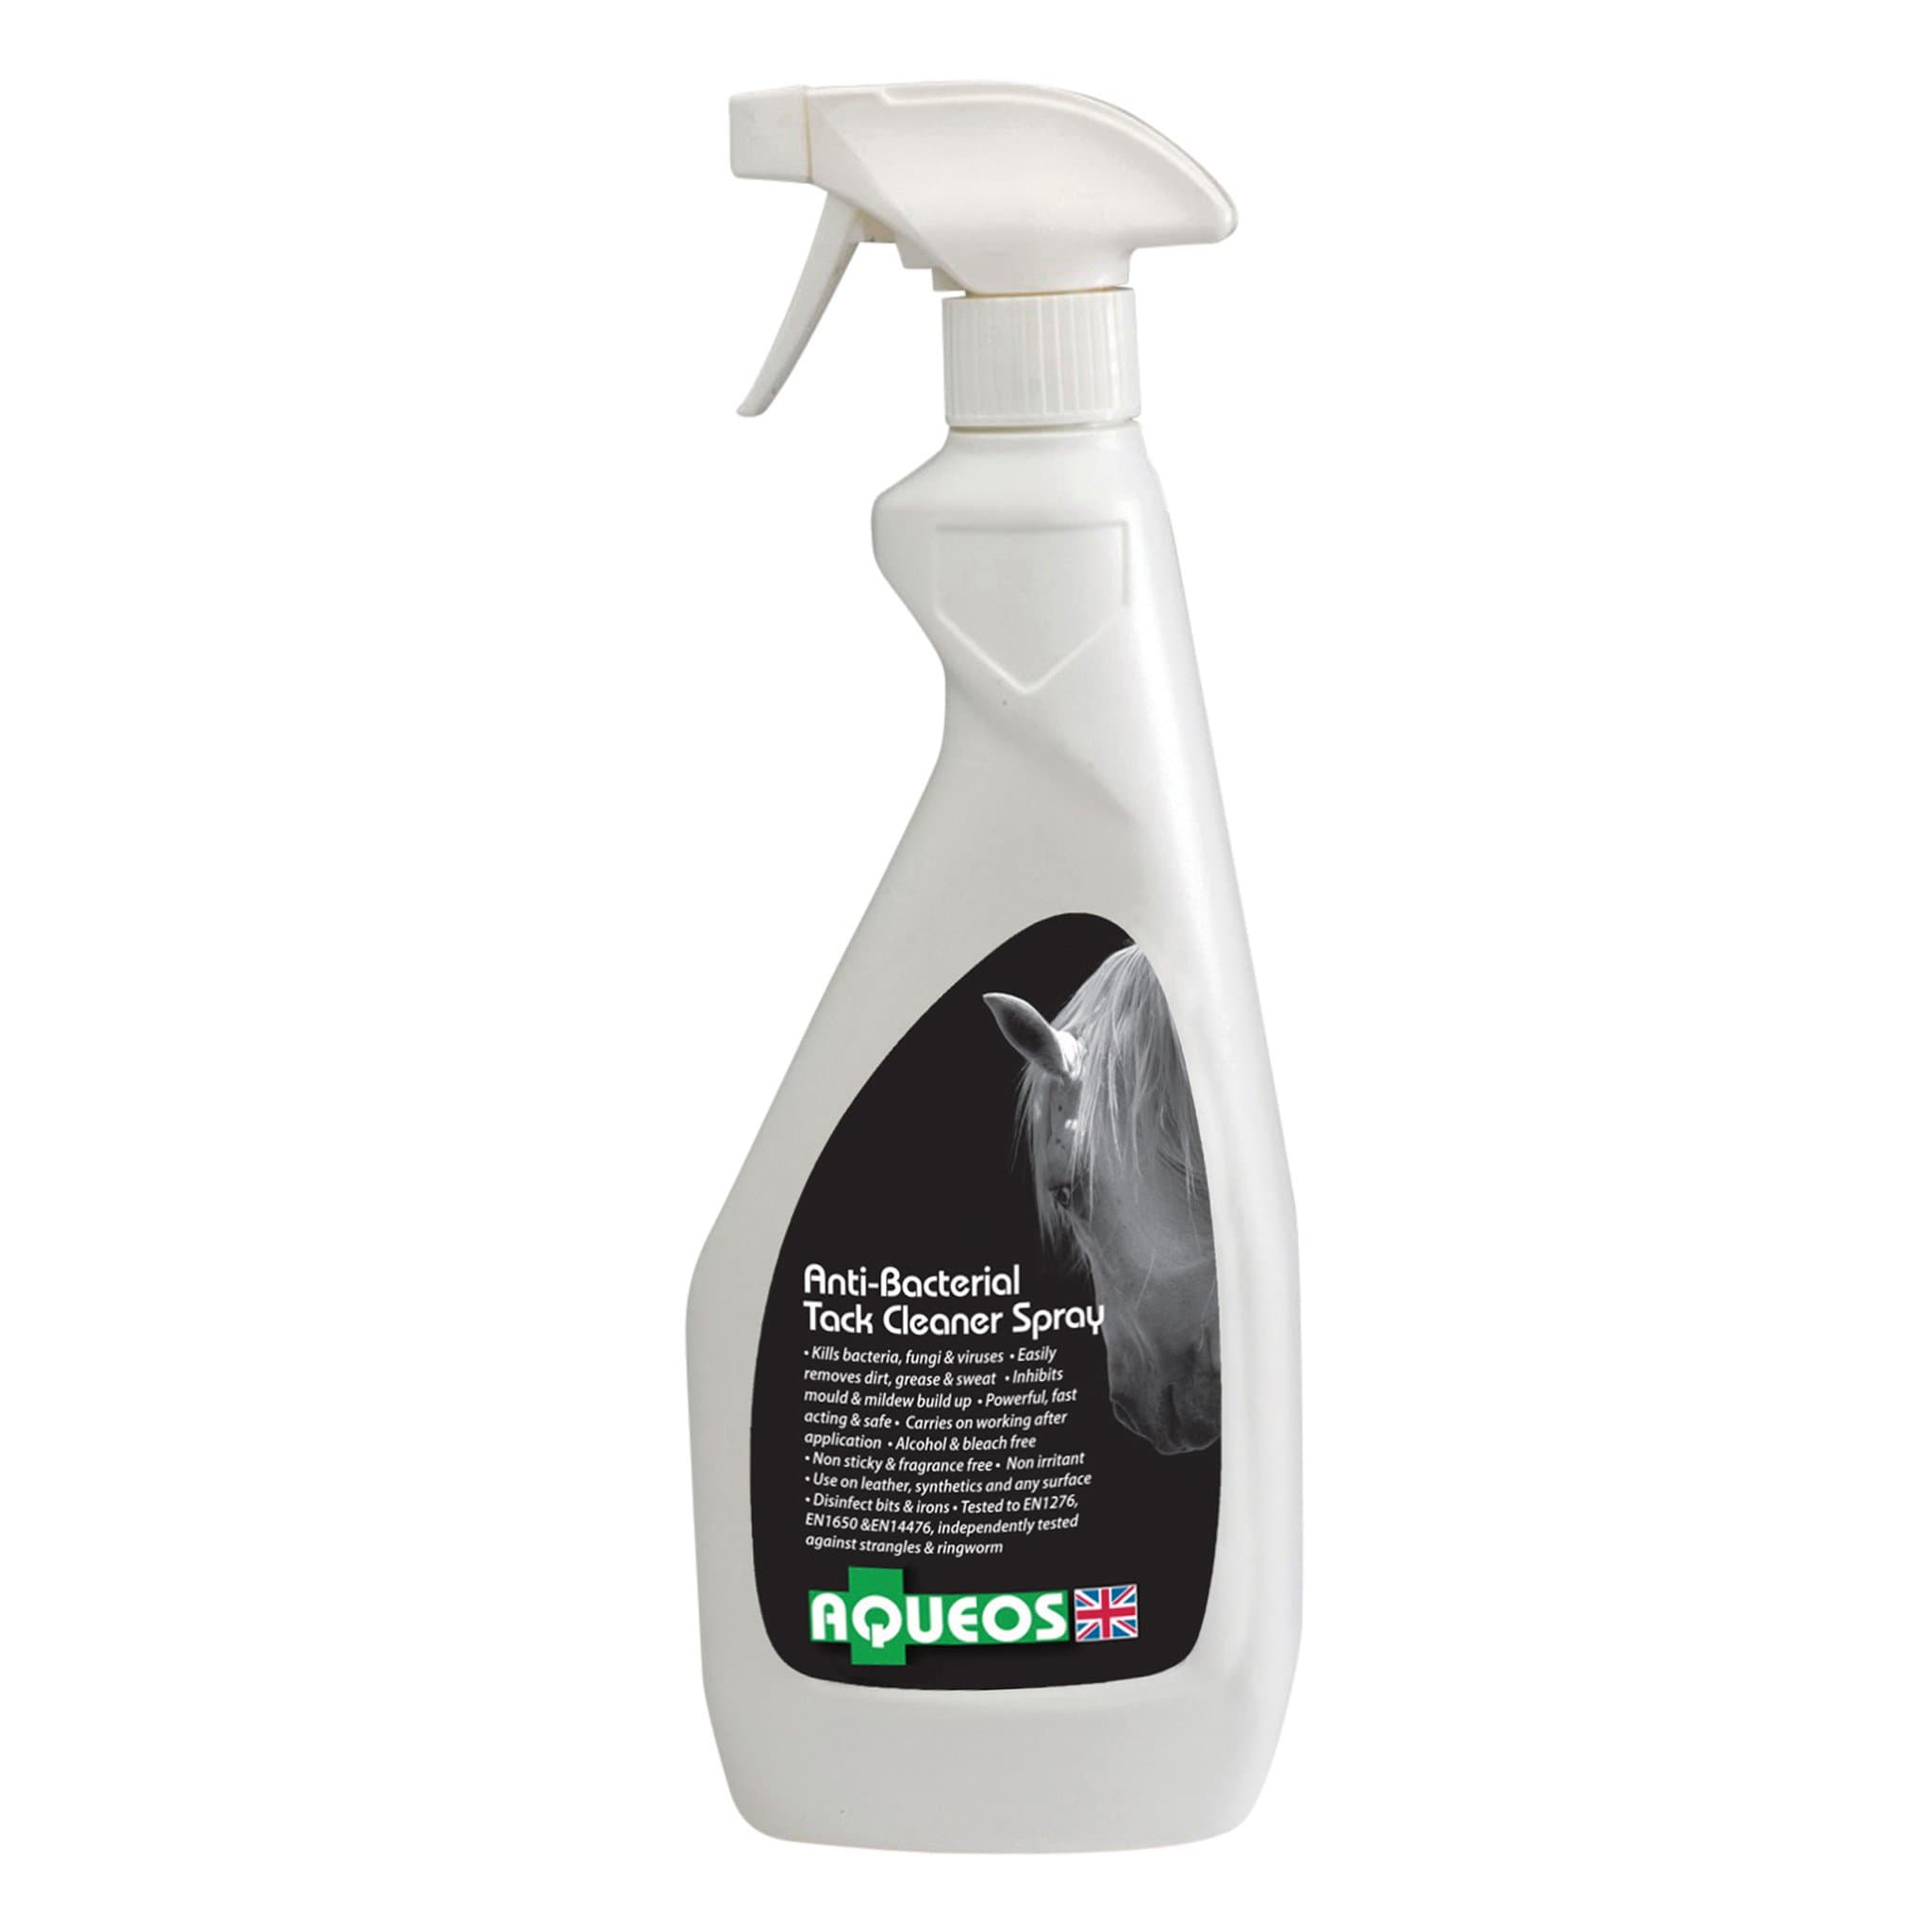 Aqueous Equine Anti-Bacterial Tack Cleaner Spray 8027